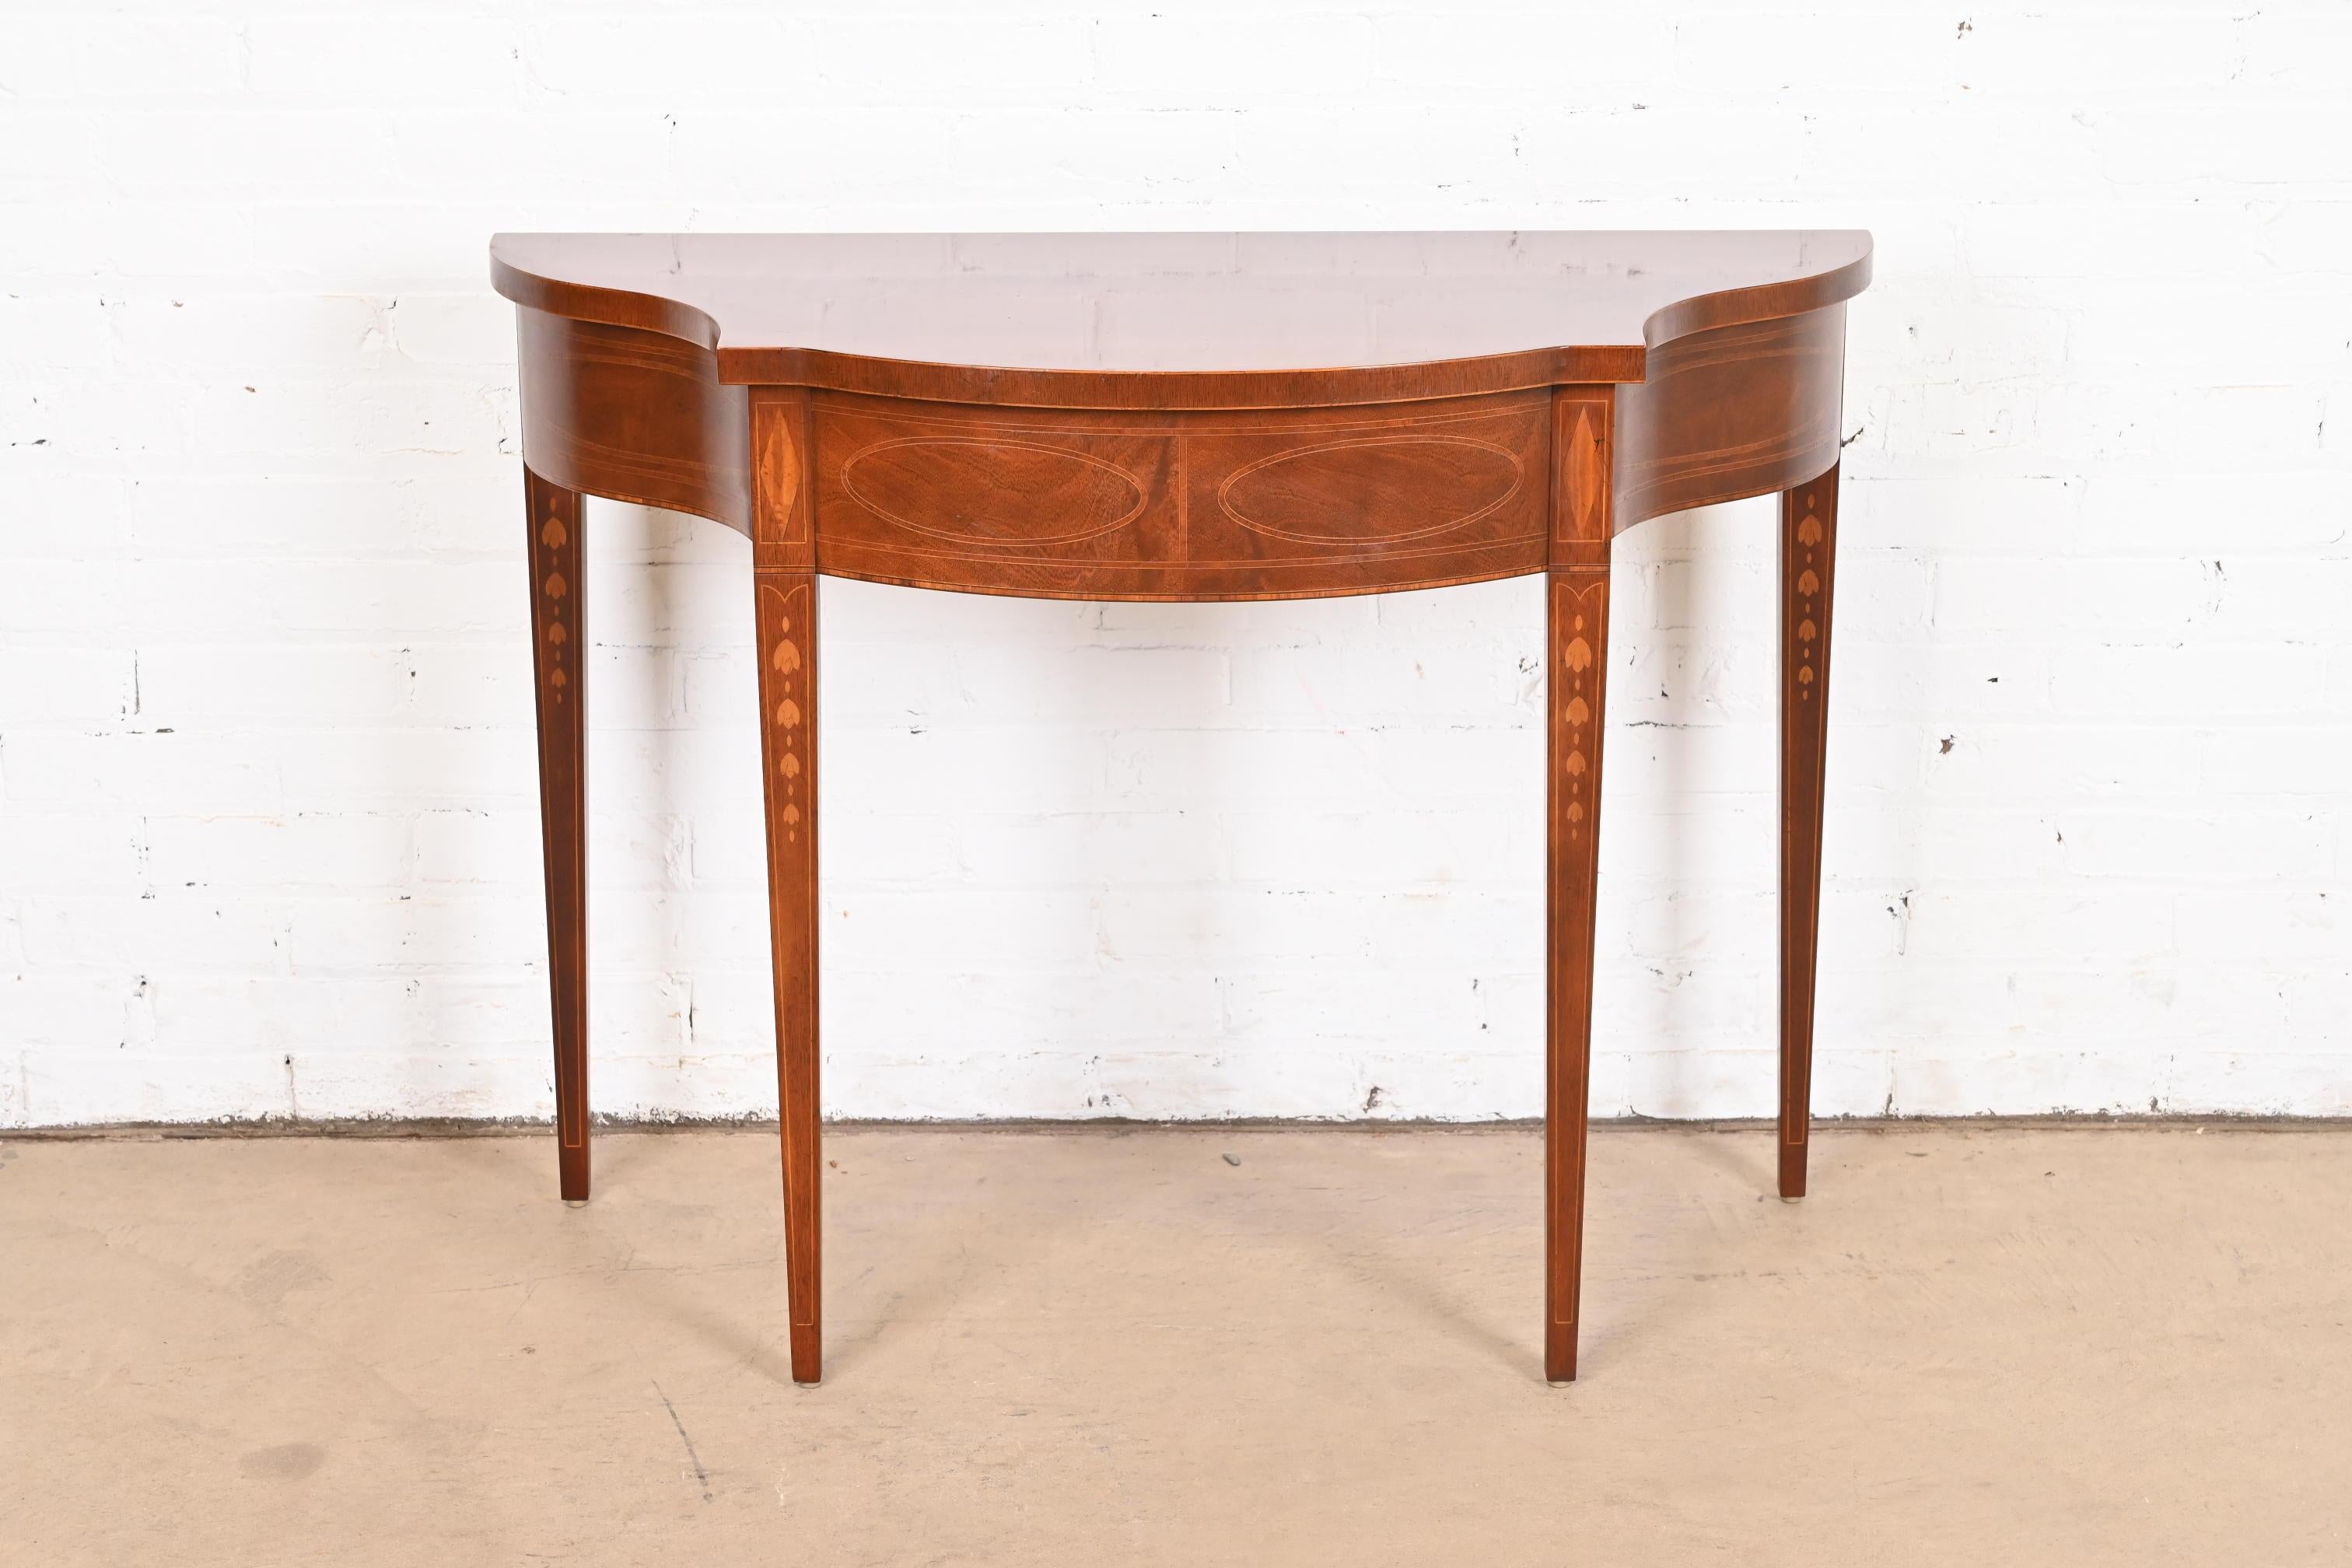 A gorgeous Federal or Hepplewhite style console table, sofa table, or entry table

By Baker Furniture, 